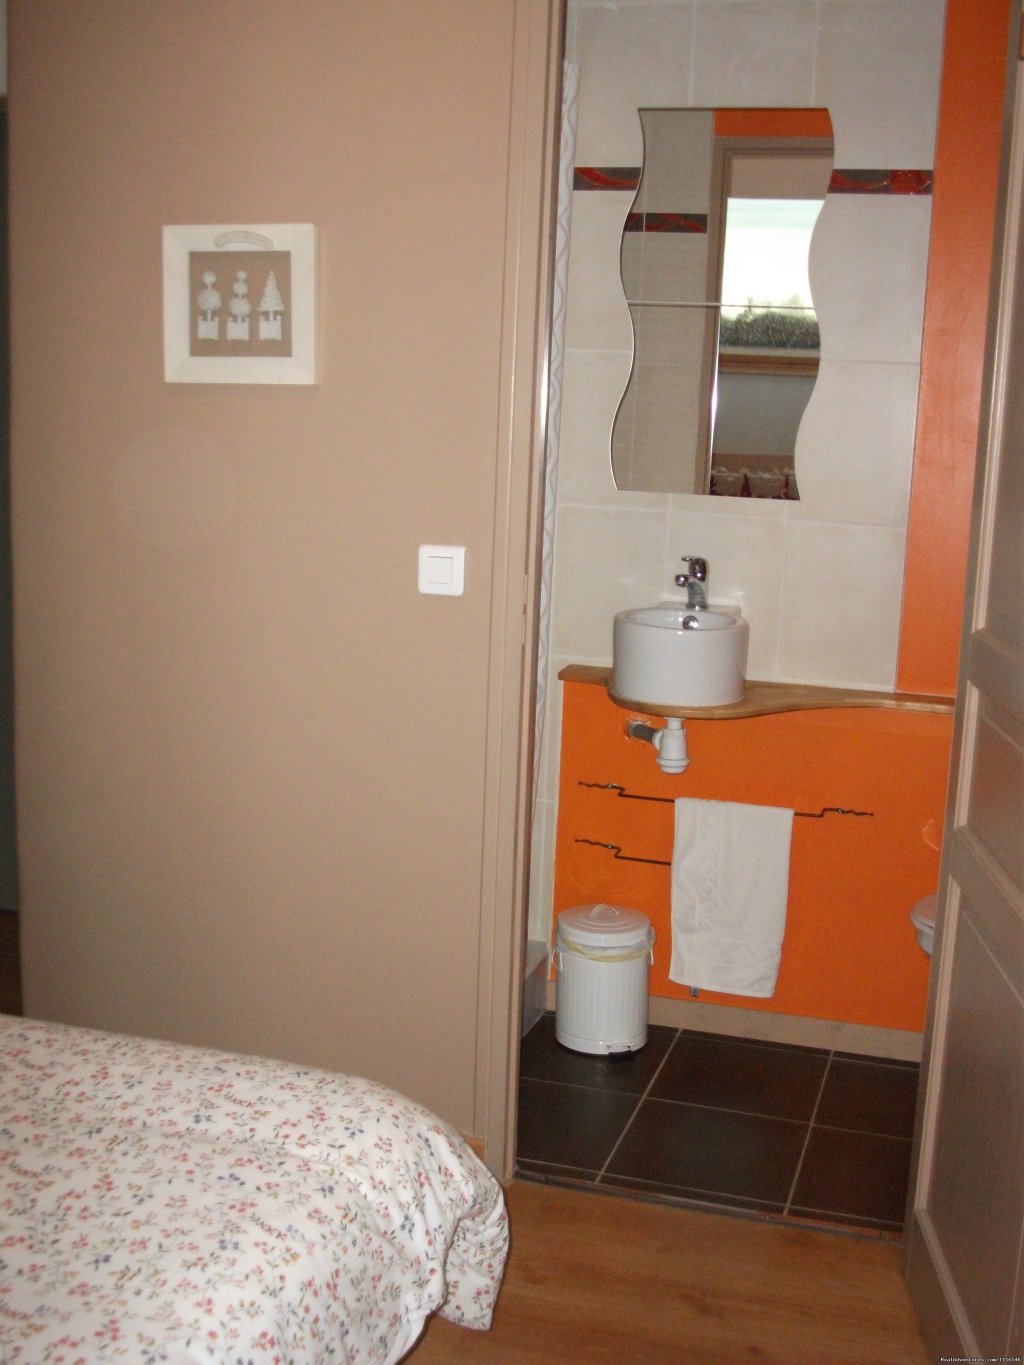 Ensuite in loft apartment | B+B/self-catering accomodations in Normandy | Image #15/23 | 